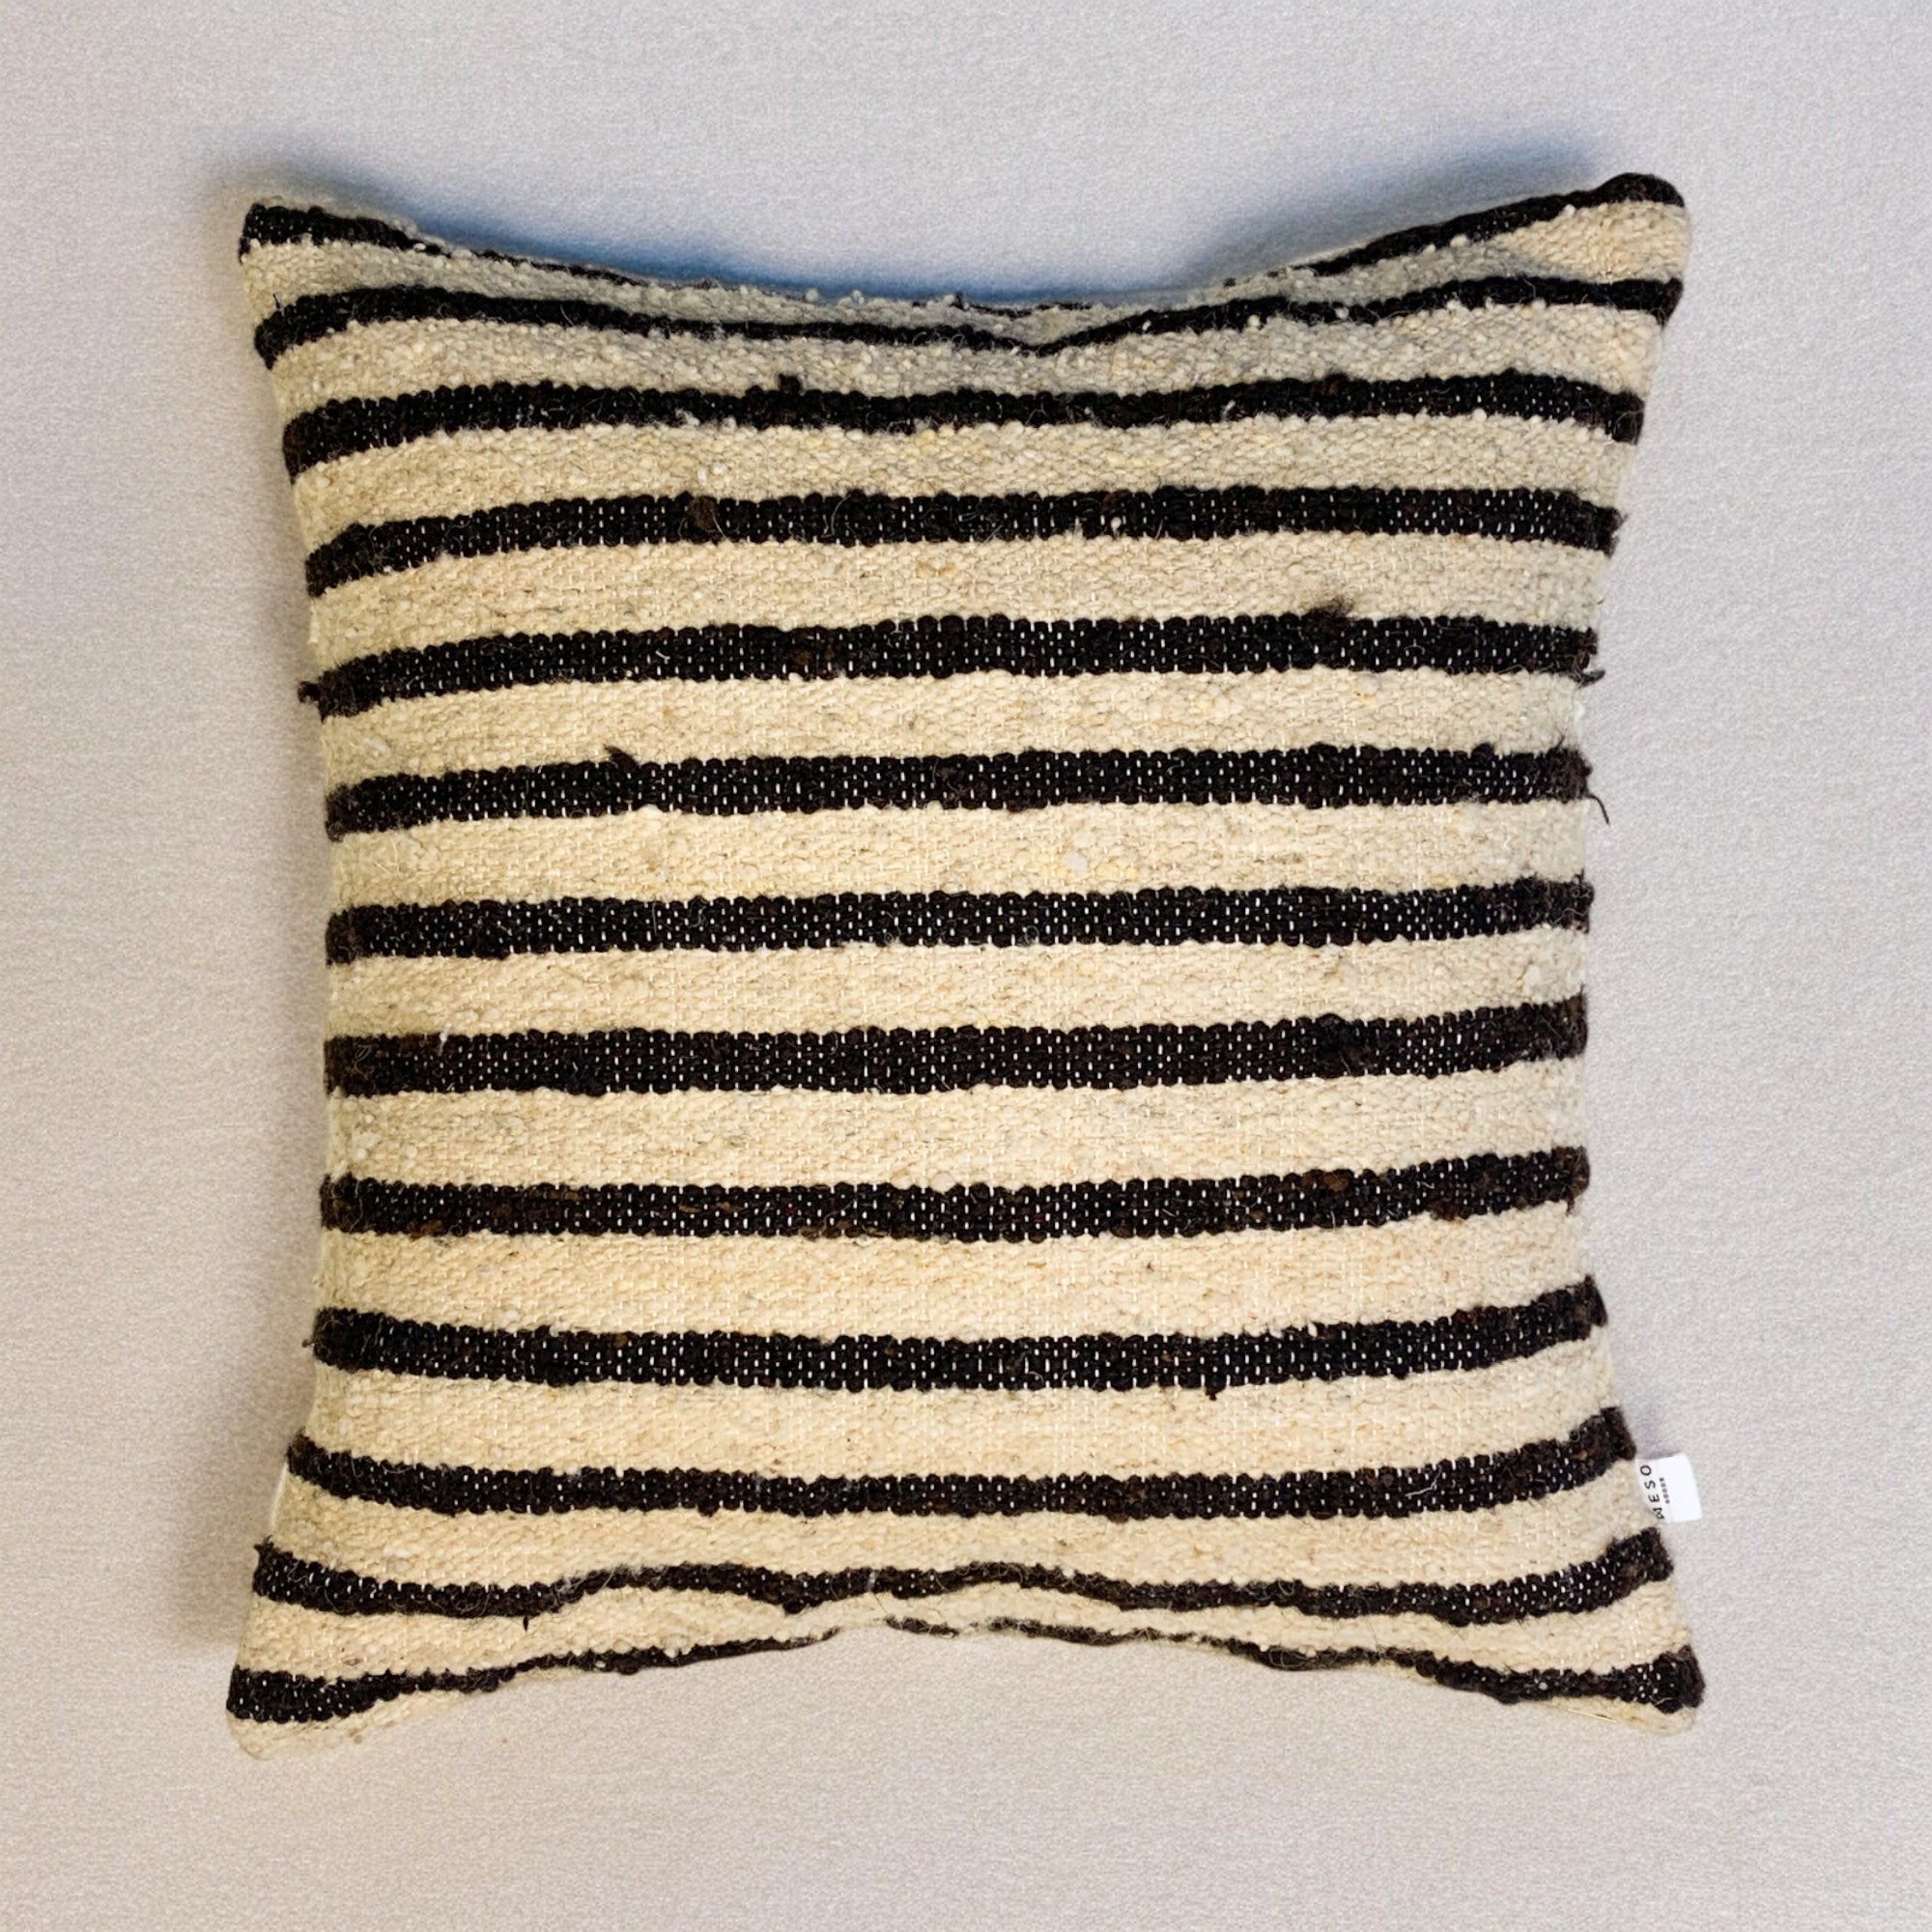 Stripes Wool Pillow Covers by Diego Olivero Studio